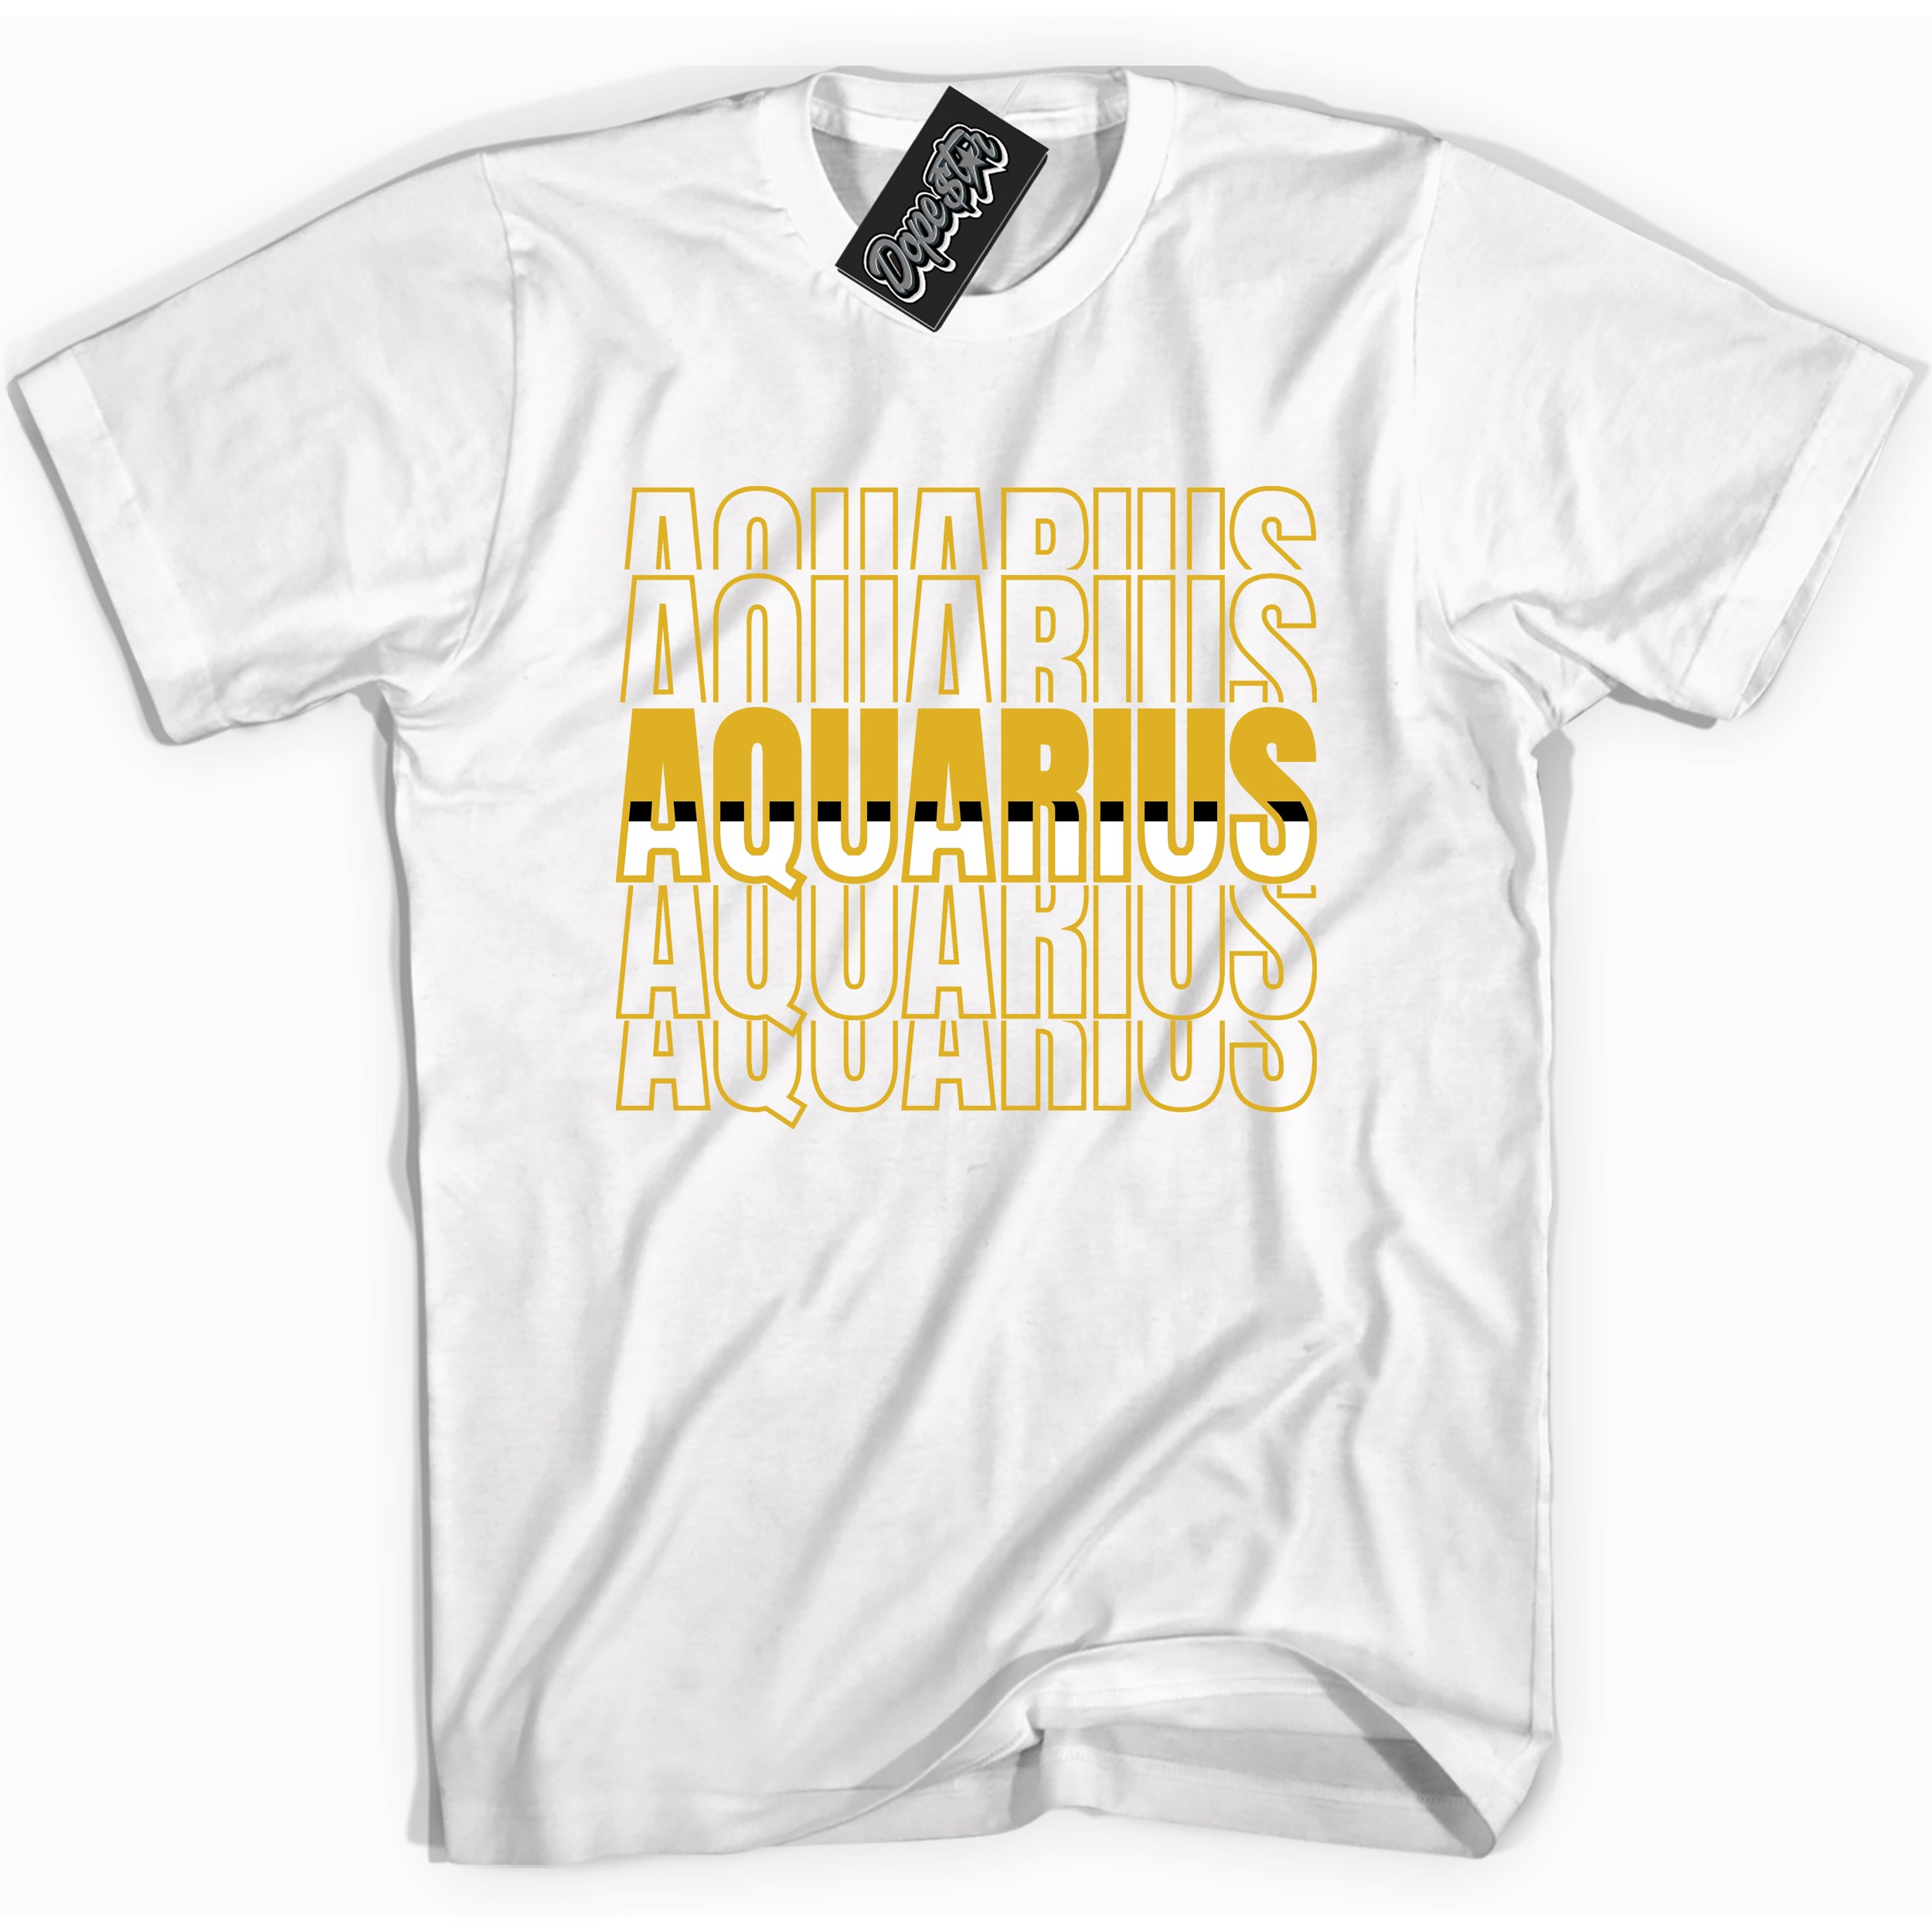 Cool White Shirt With Aquarius  design That Perfectly Matches YELLOW OCHRE 6s Sneakers.